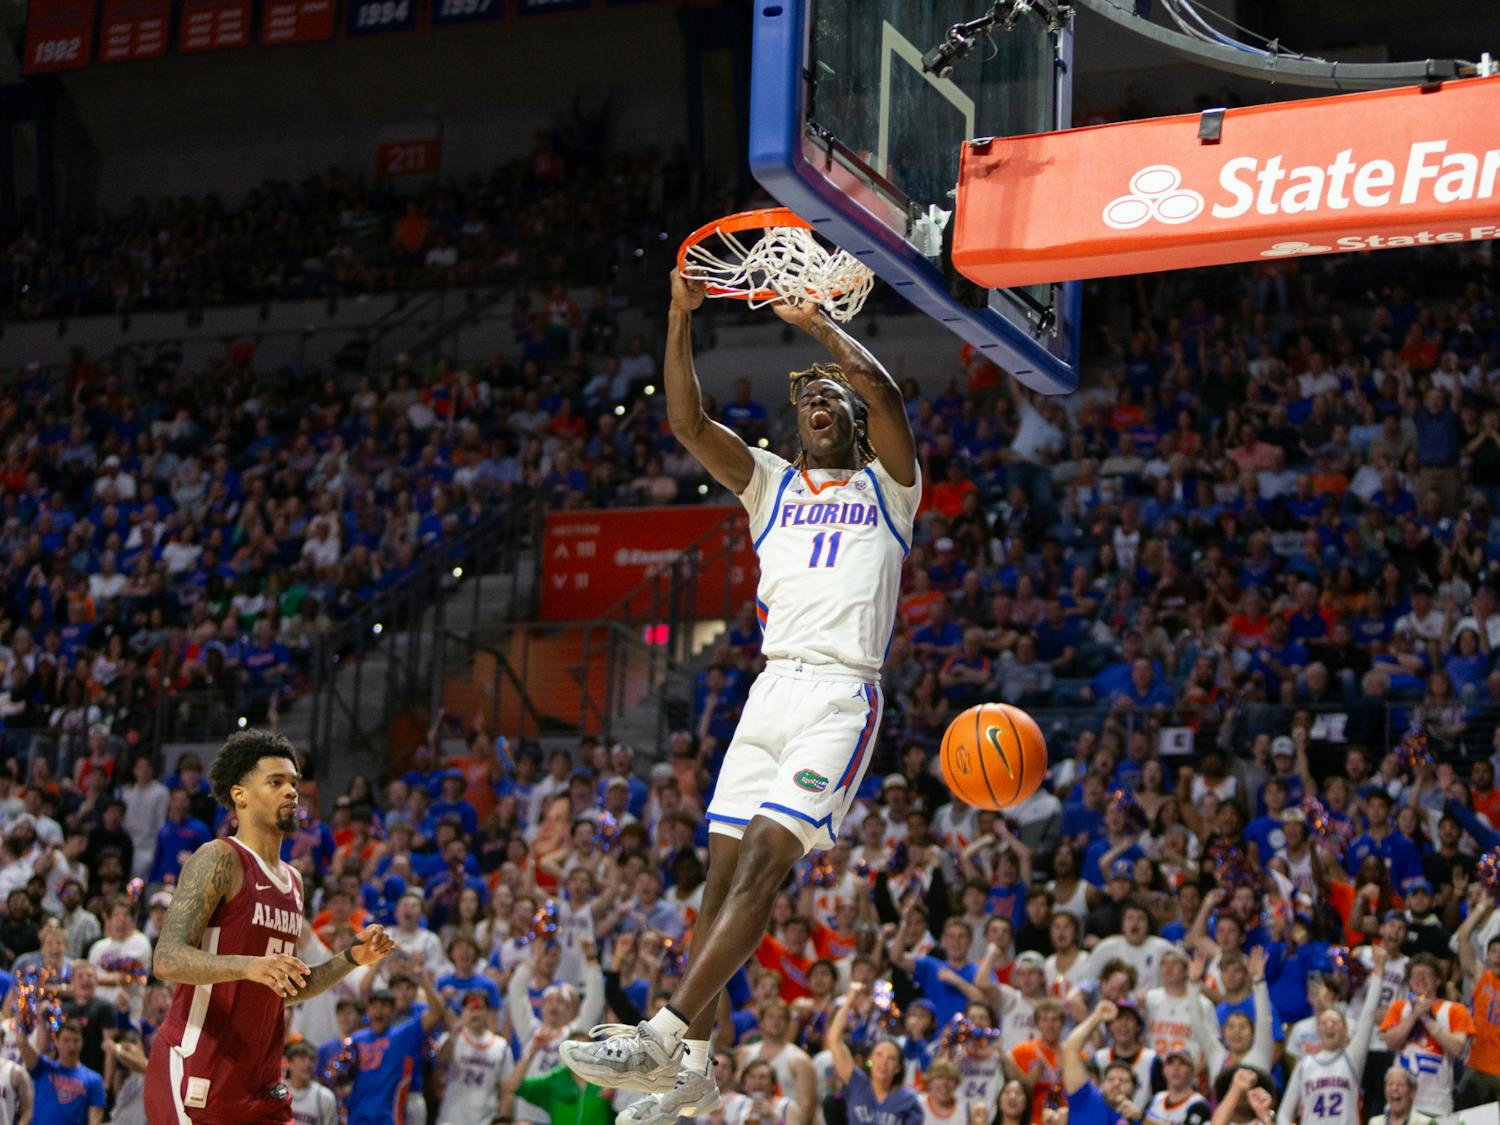  Florida sophomore Denzel Aberdeen makes a dunk against the Alabama Crimson Tide on Tuesday, March 5. Photo by Ryan Friedenberg